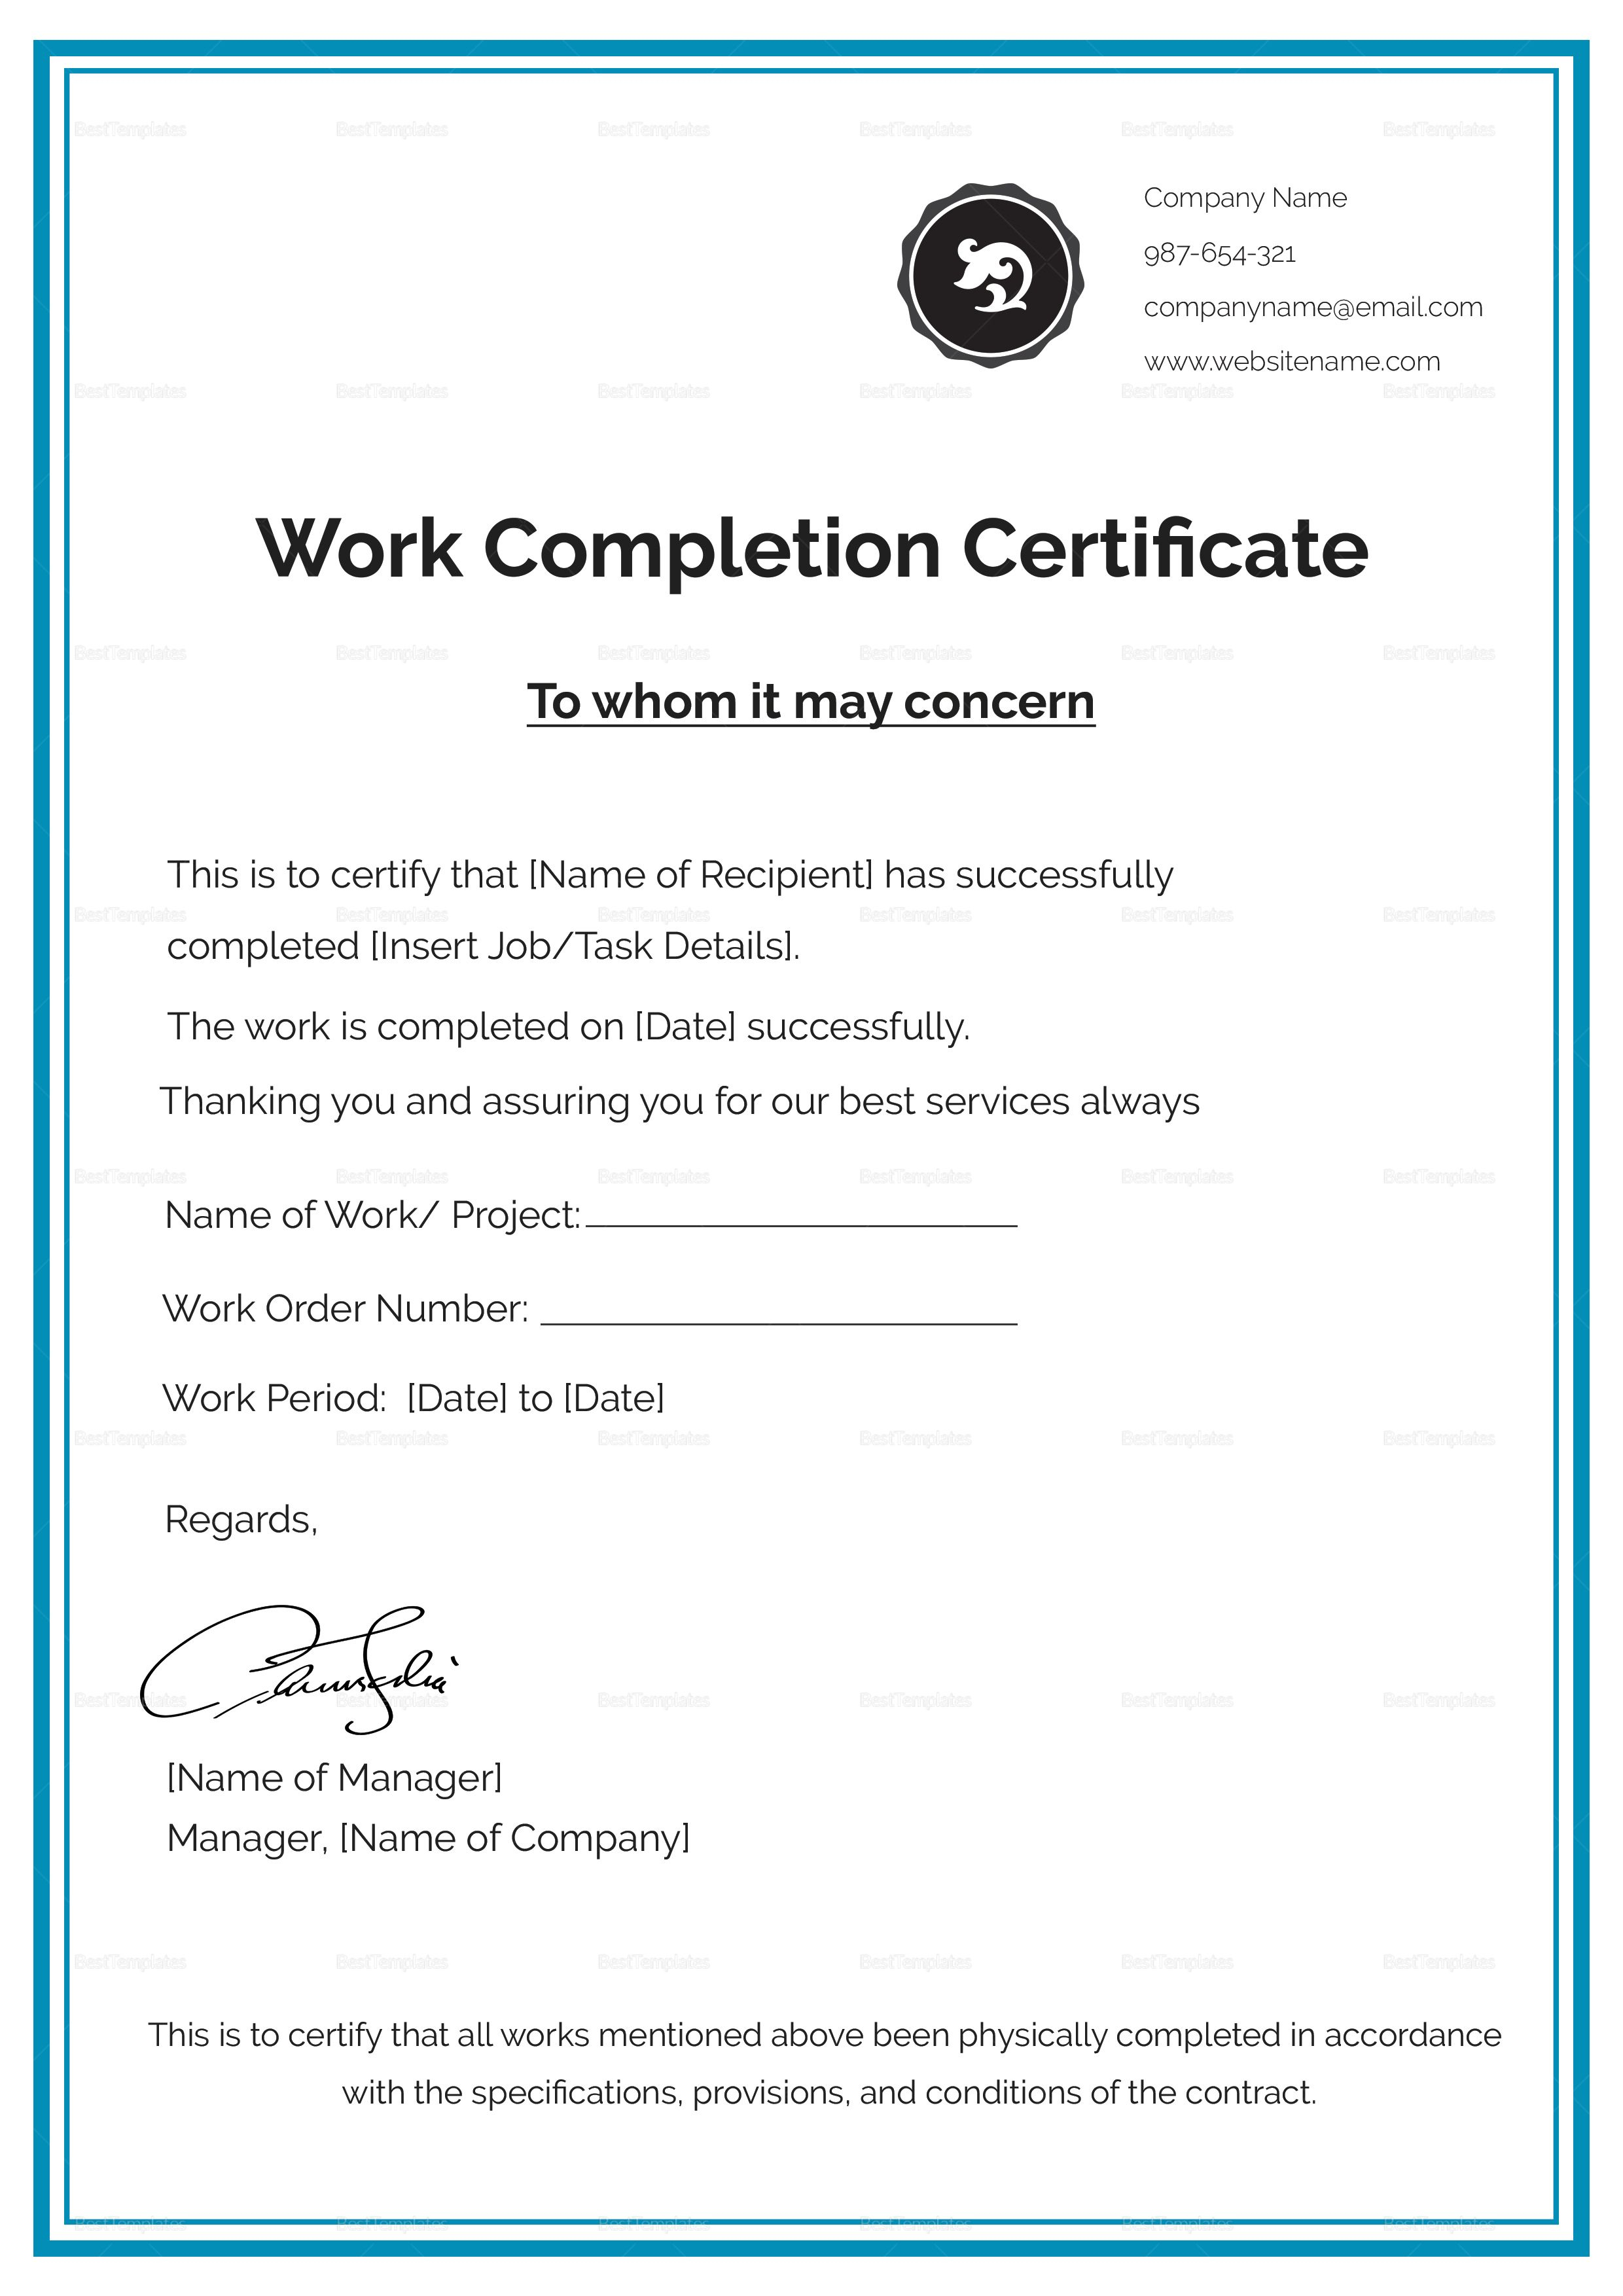 Work Completion Certificate Template In 2019 | Certificate Inside Certificate Template For Project Completion